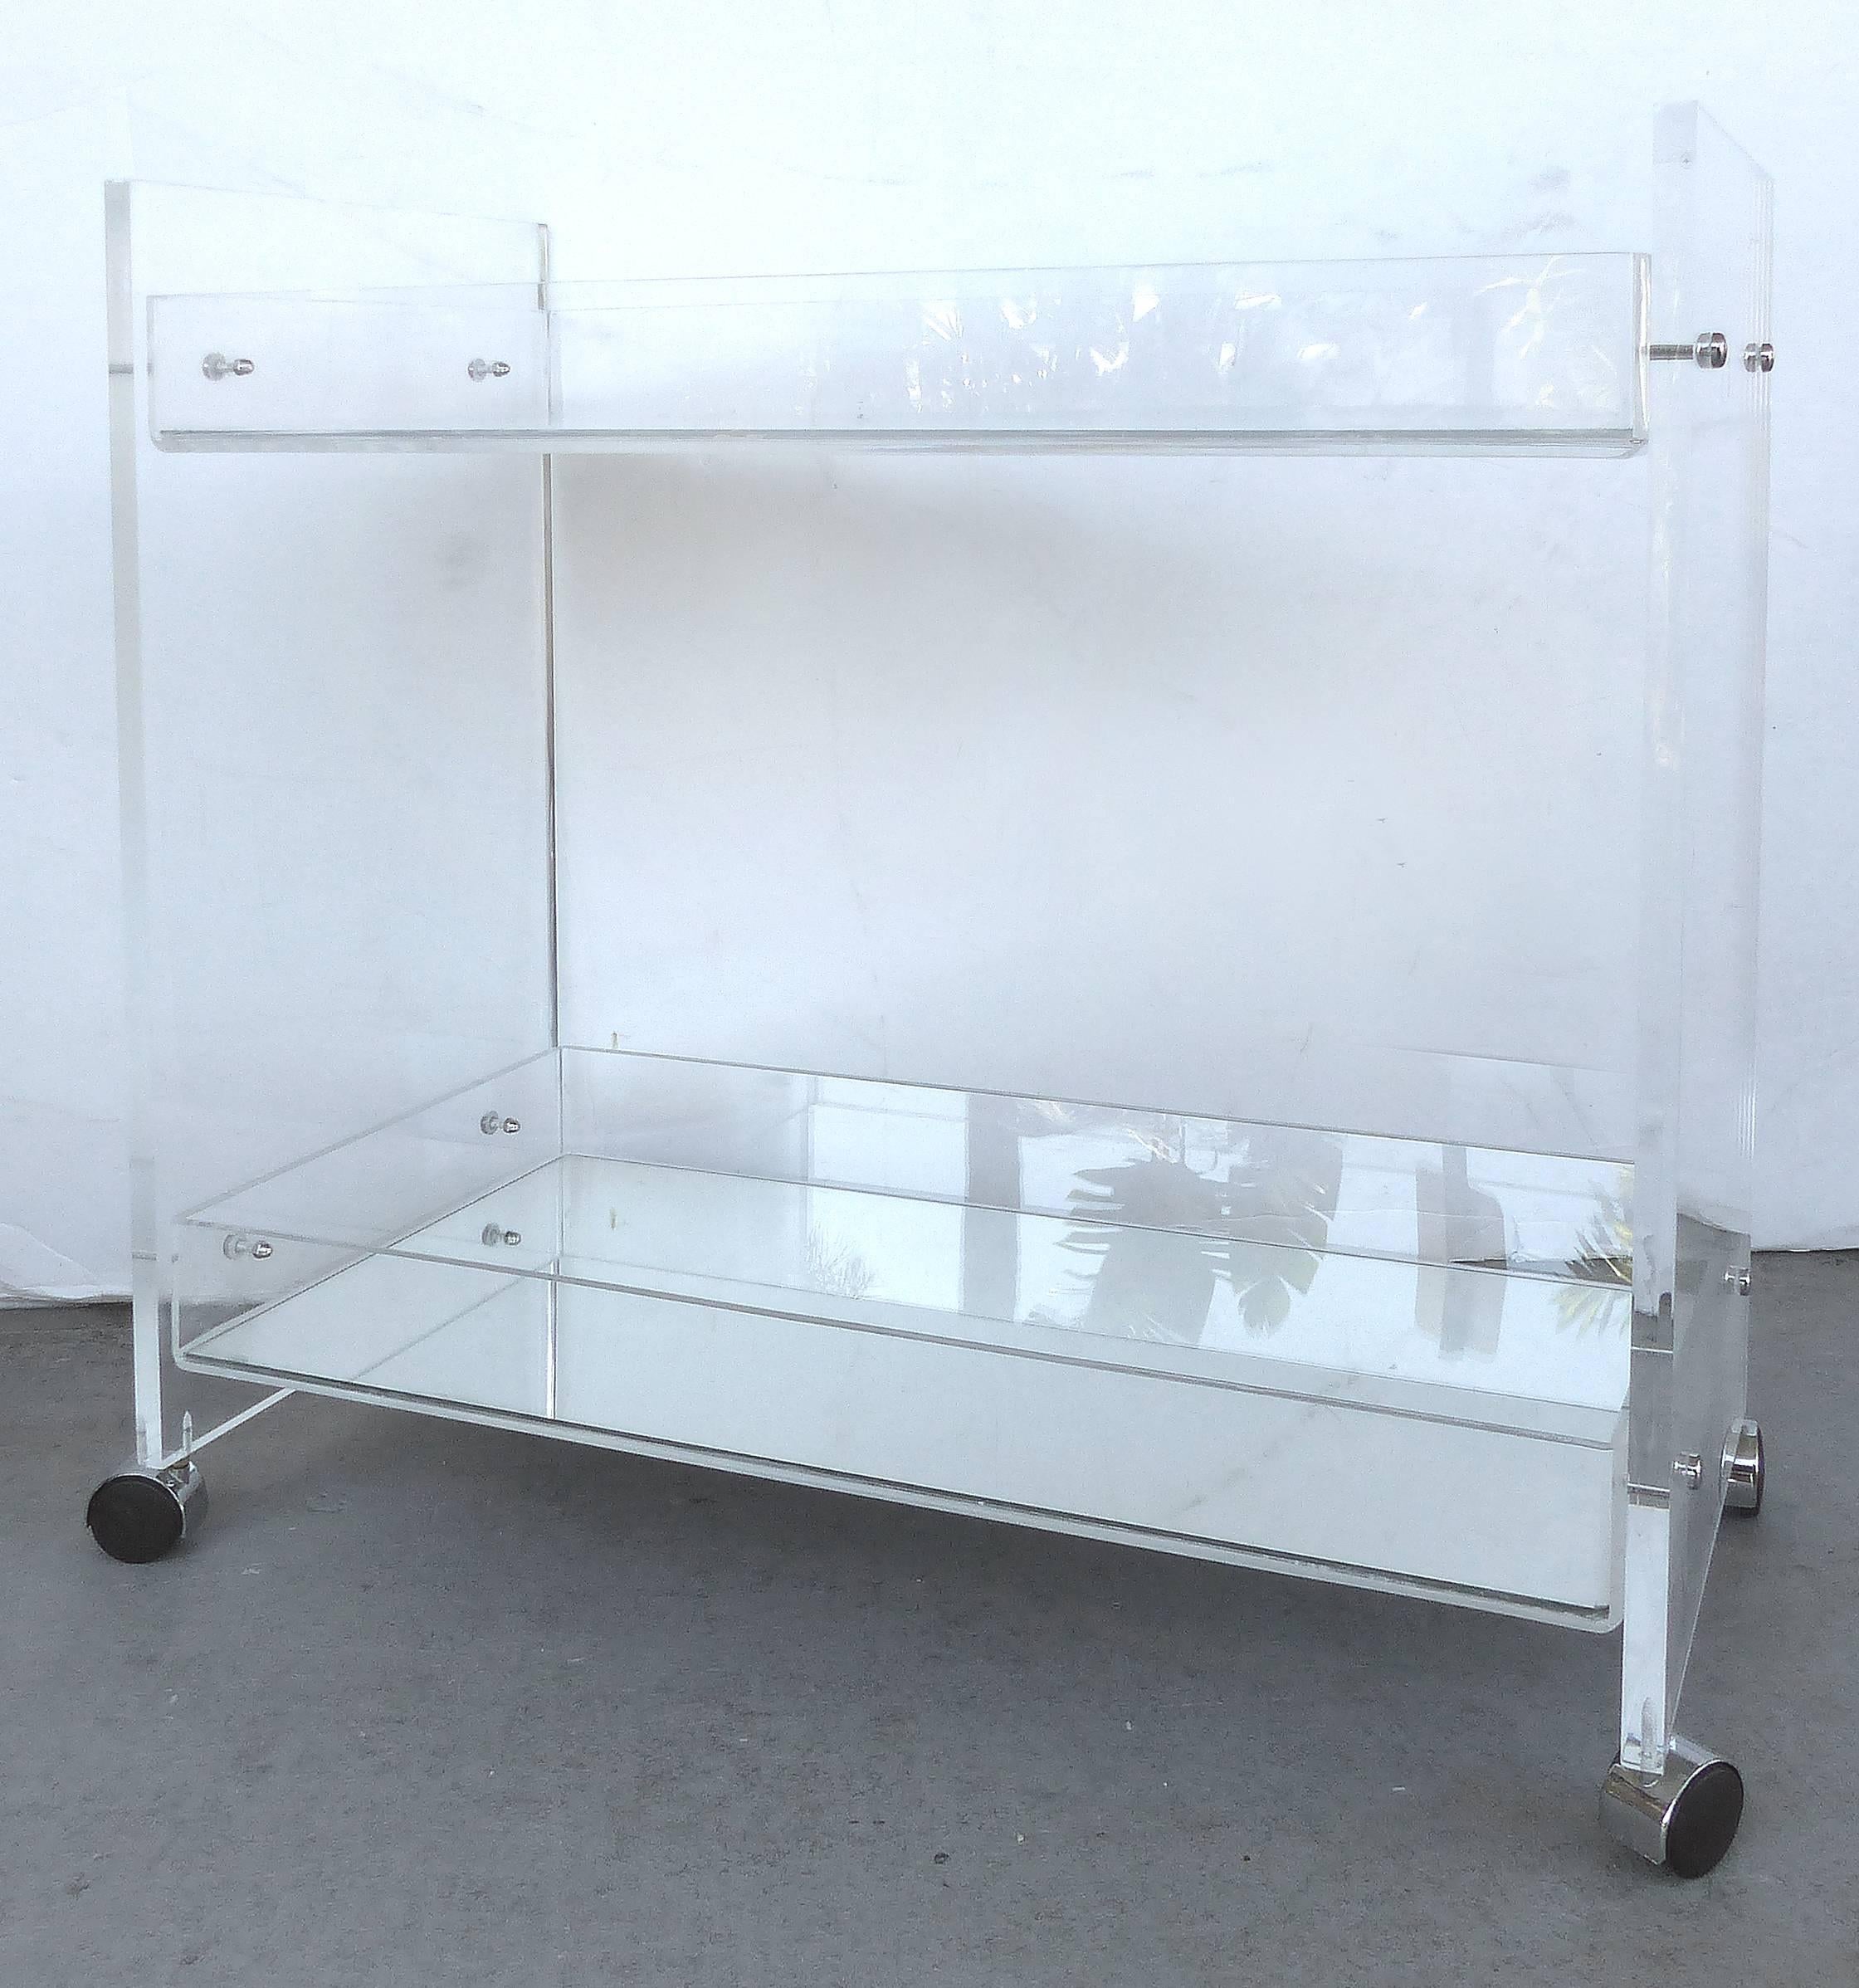 Bi-Level Rolling Lucite Bar Cart with Mirrored Serving Surfaces

Offered for sale is a Lucite bi-level bar cart with mirrored shelf surfaces. The cart or trolley rolls on casters and can be pushed from either end. The top work surface measures 25.5